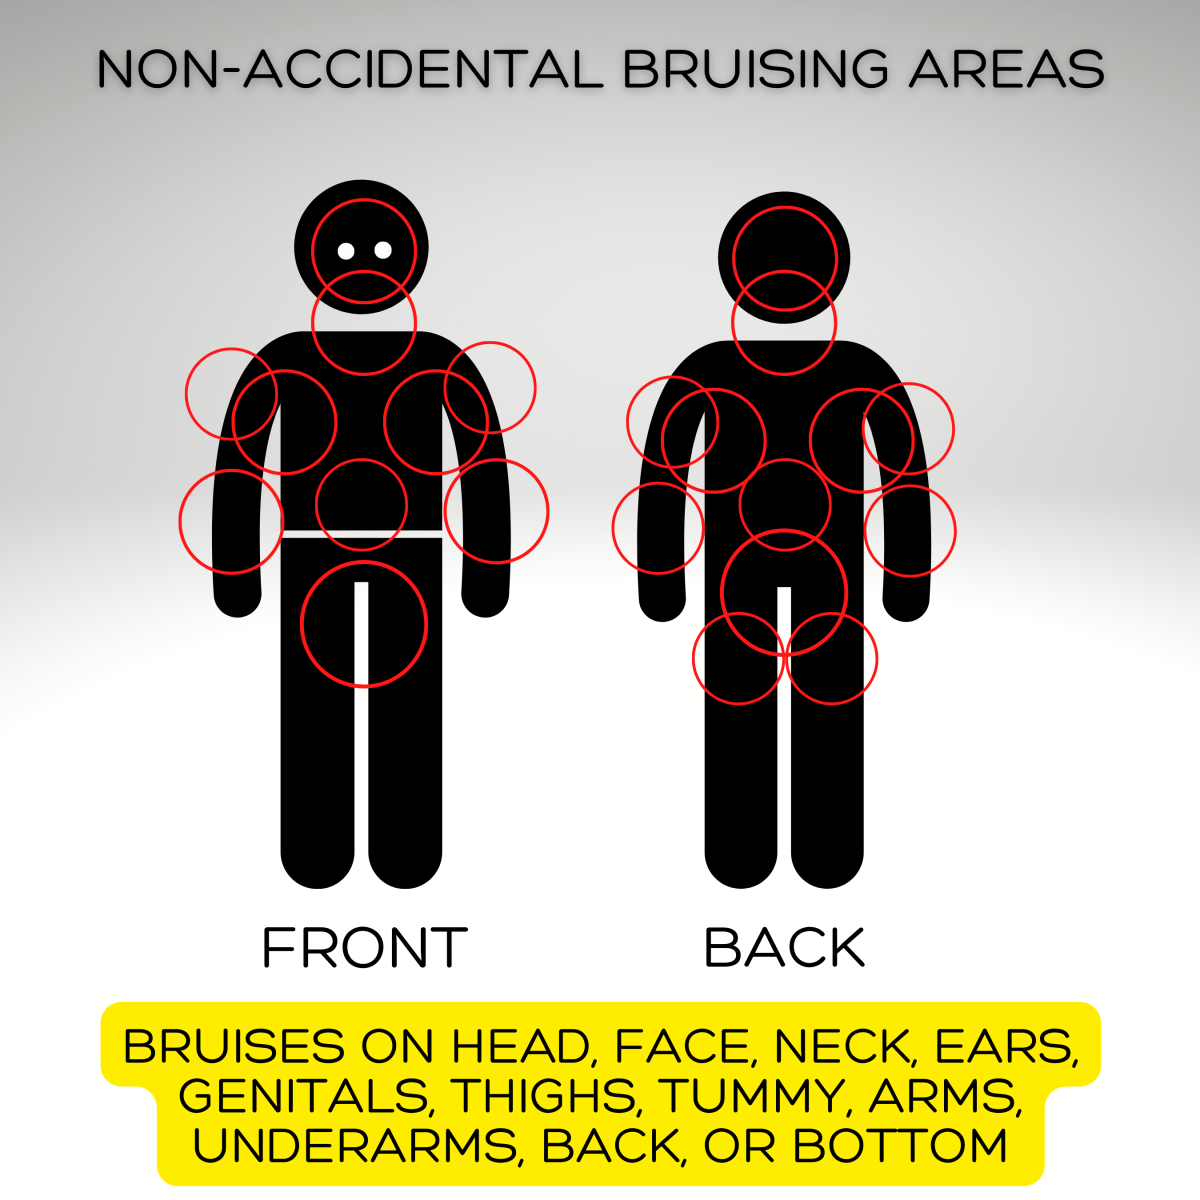 Bruises in these areas are less likely to be from normal activities. Bruises here are more often associated with abuse.